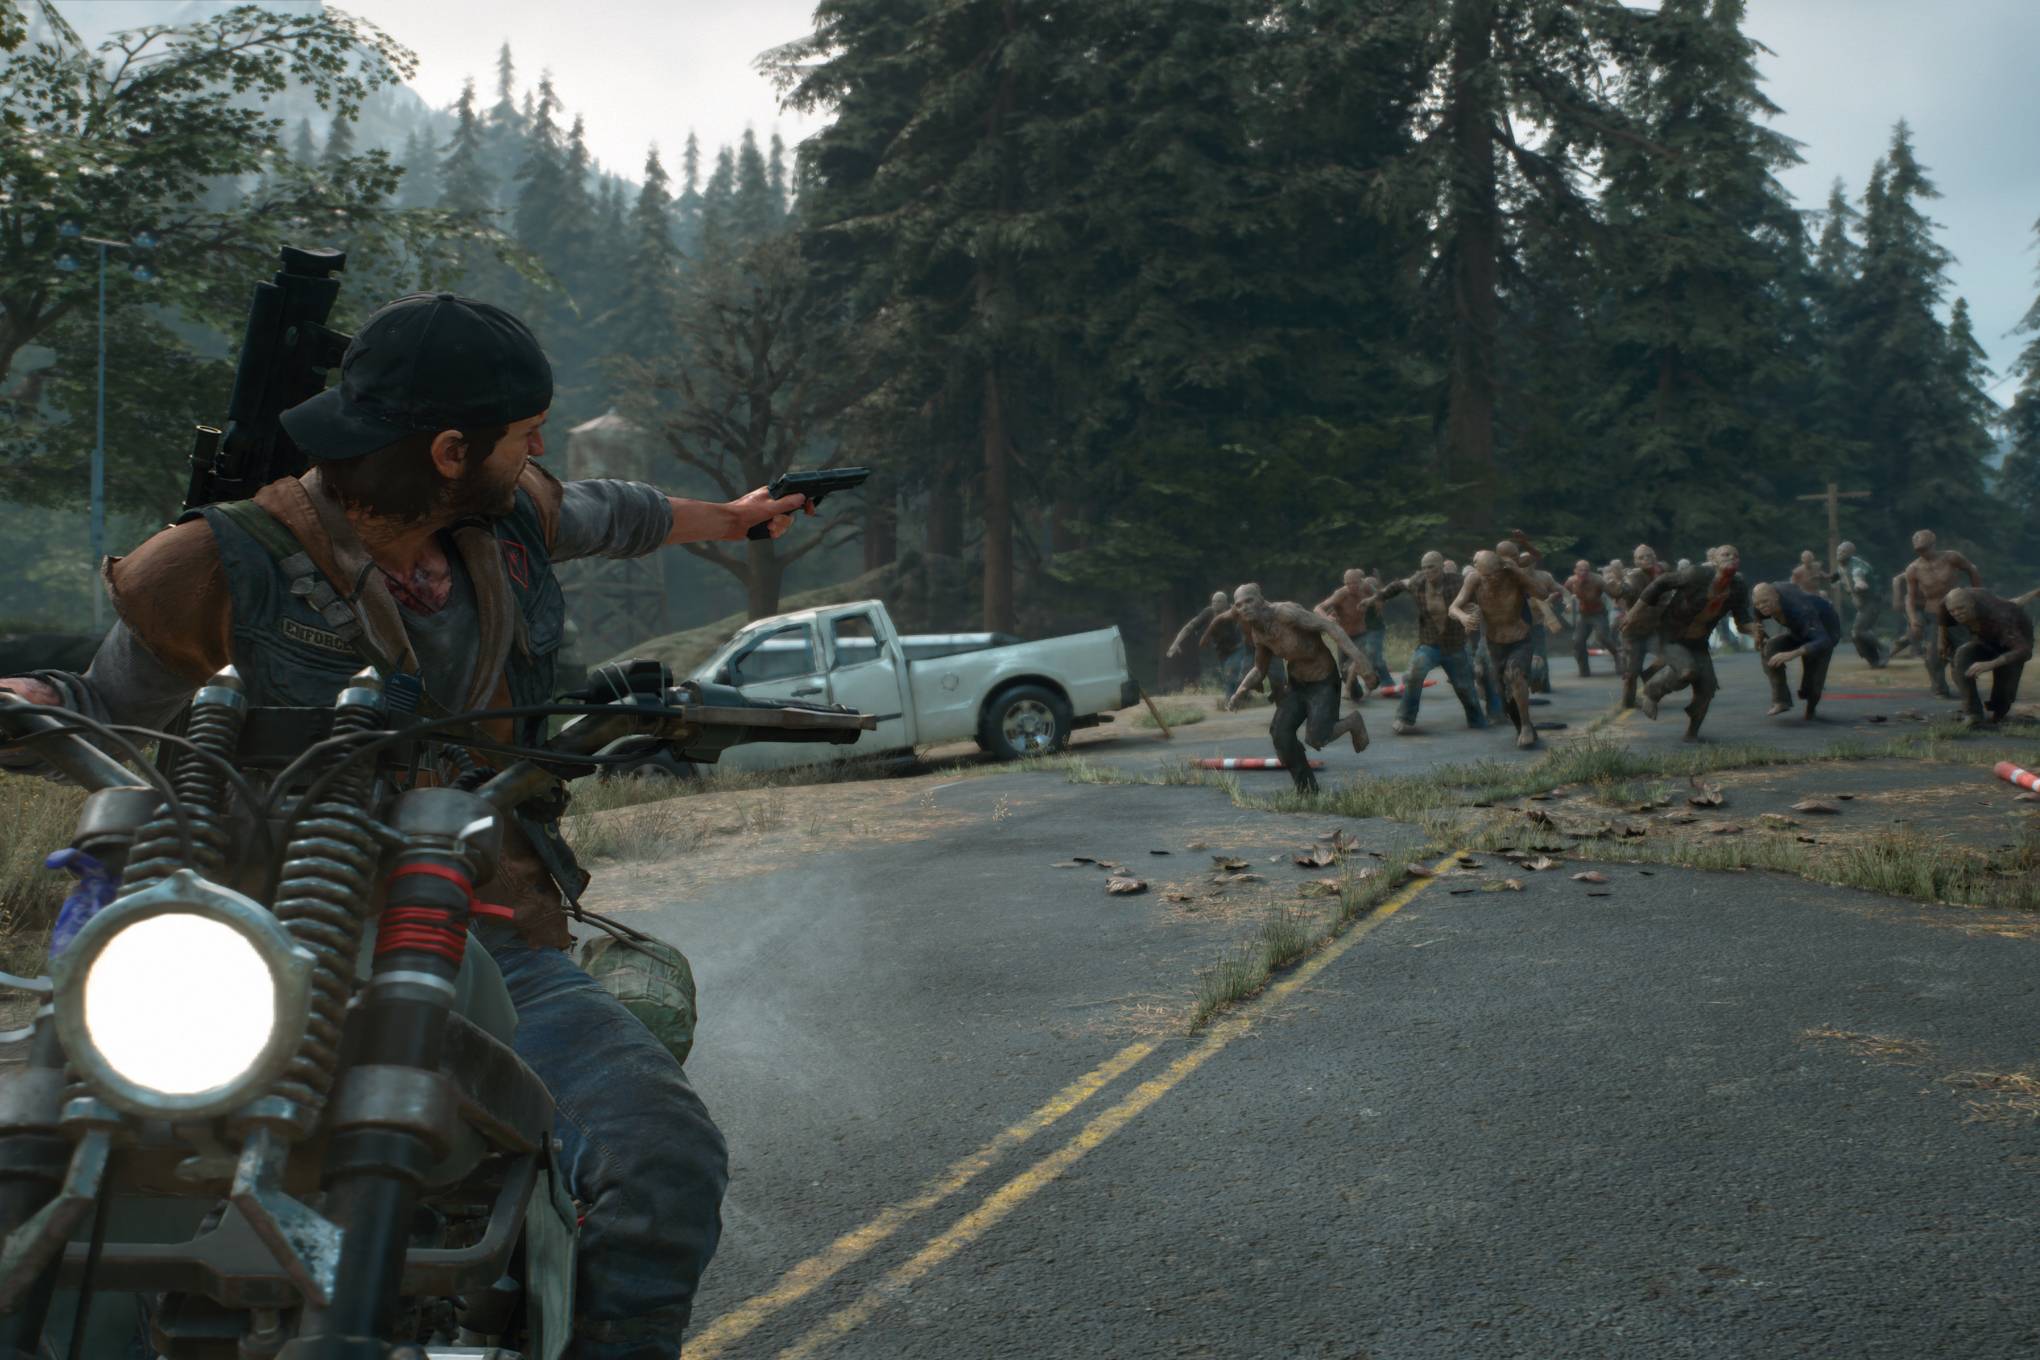 games like days gone for xbox one